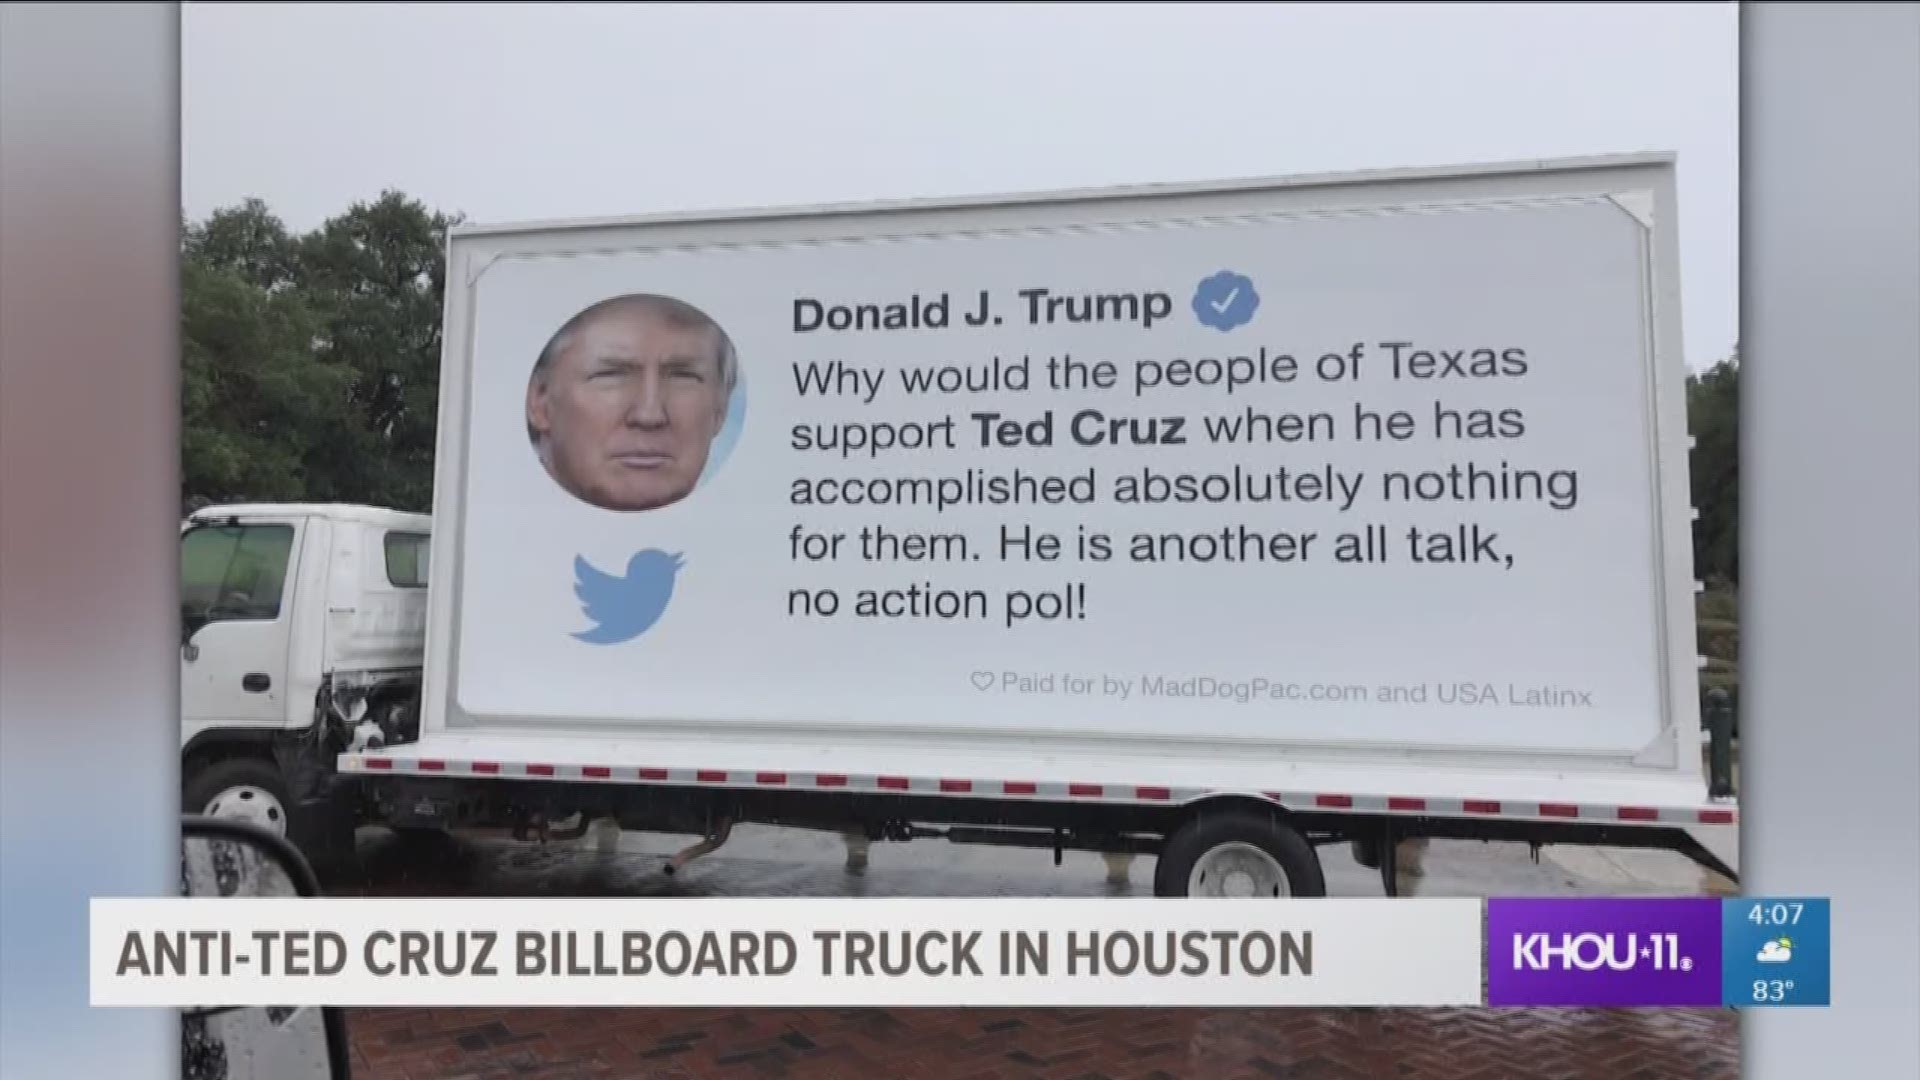 A billboard truck with an old tweet from President Trump criticizing Ted Cruz was spotted near Hermann Park on Monday.